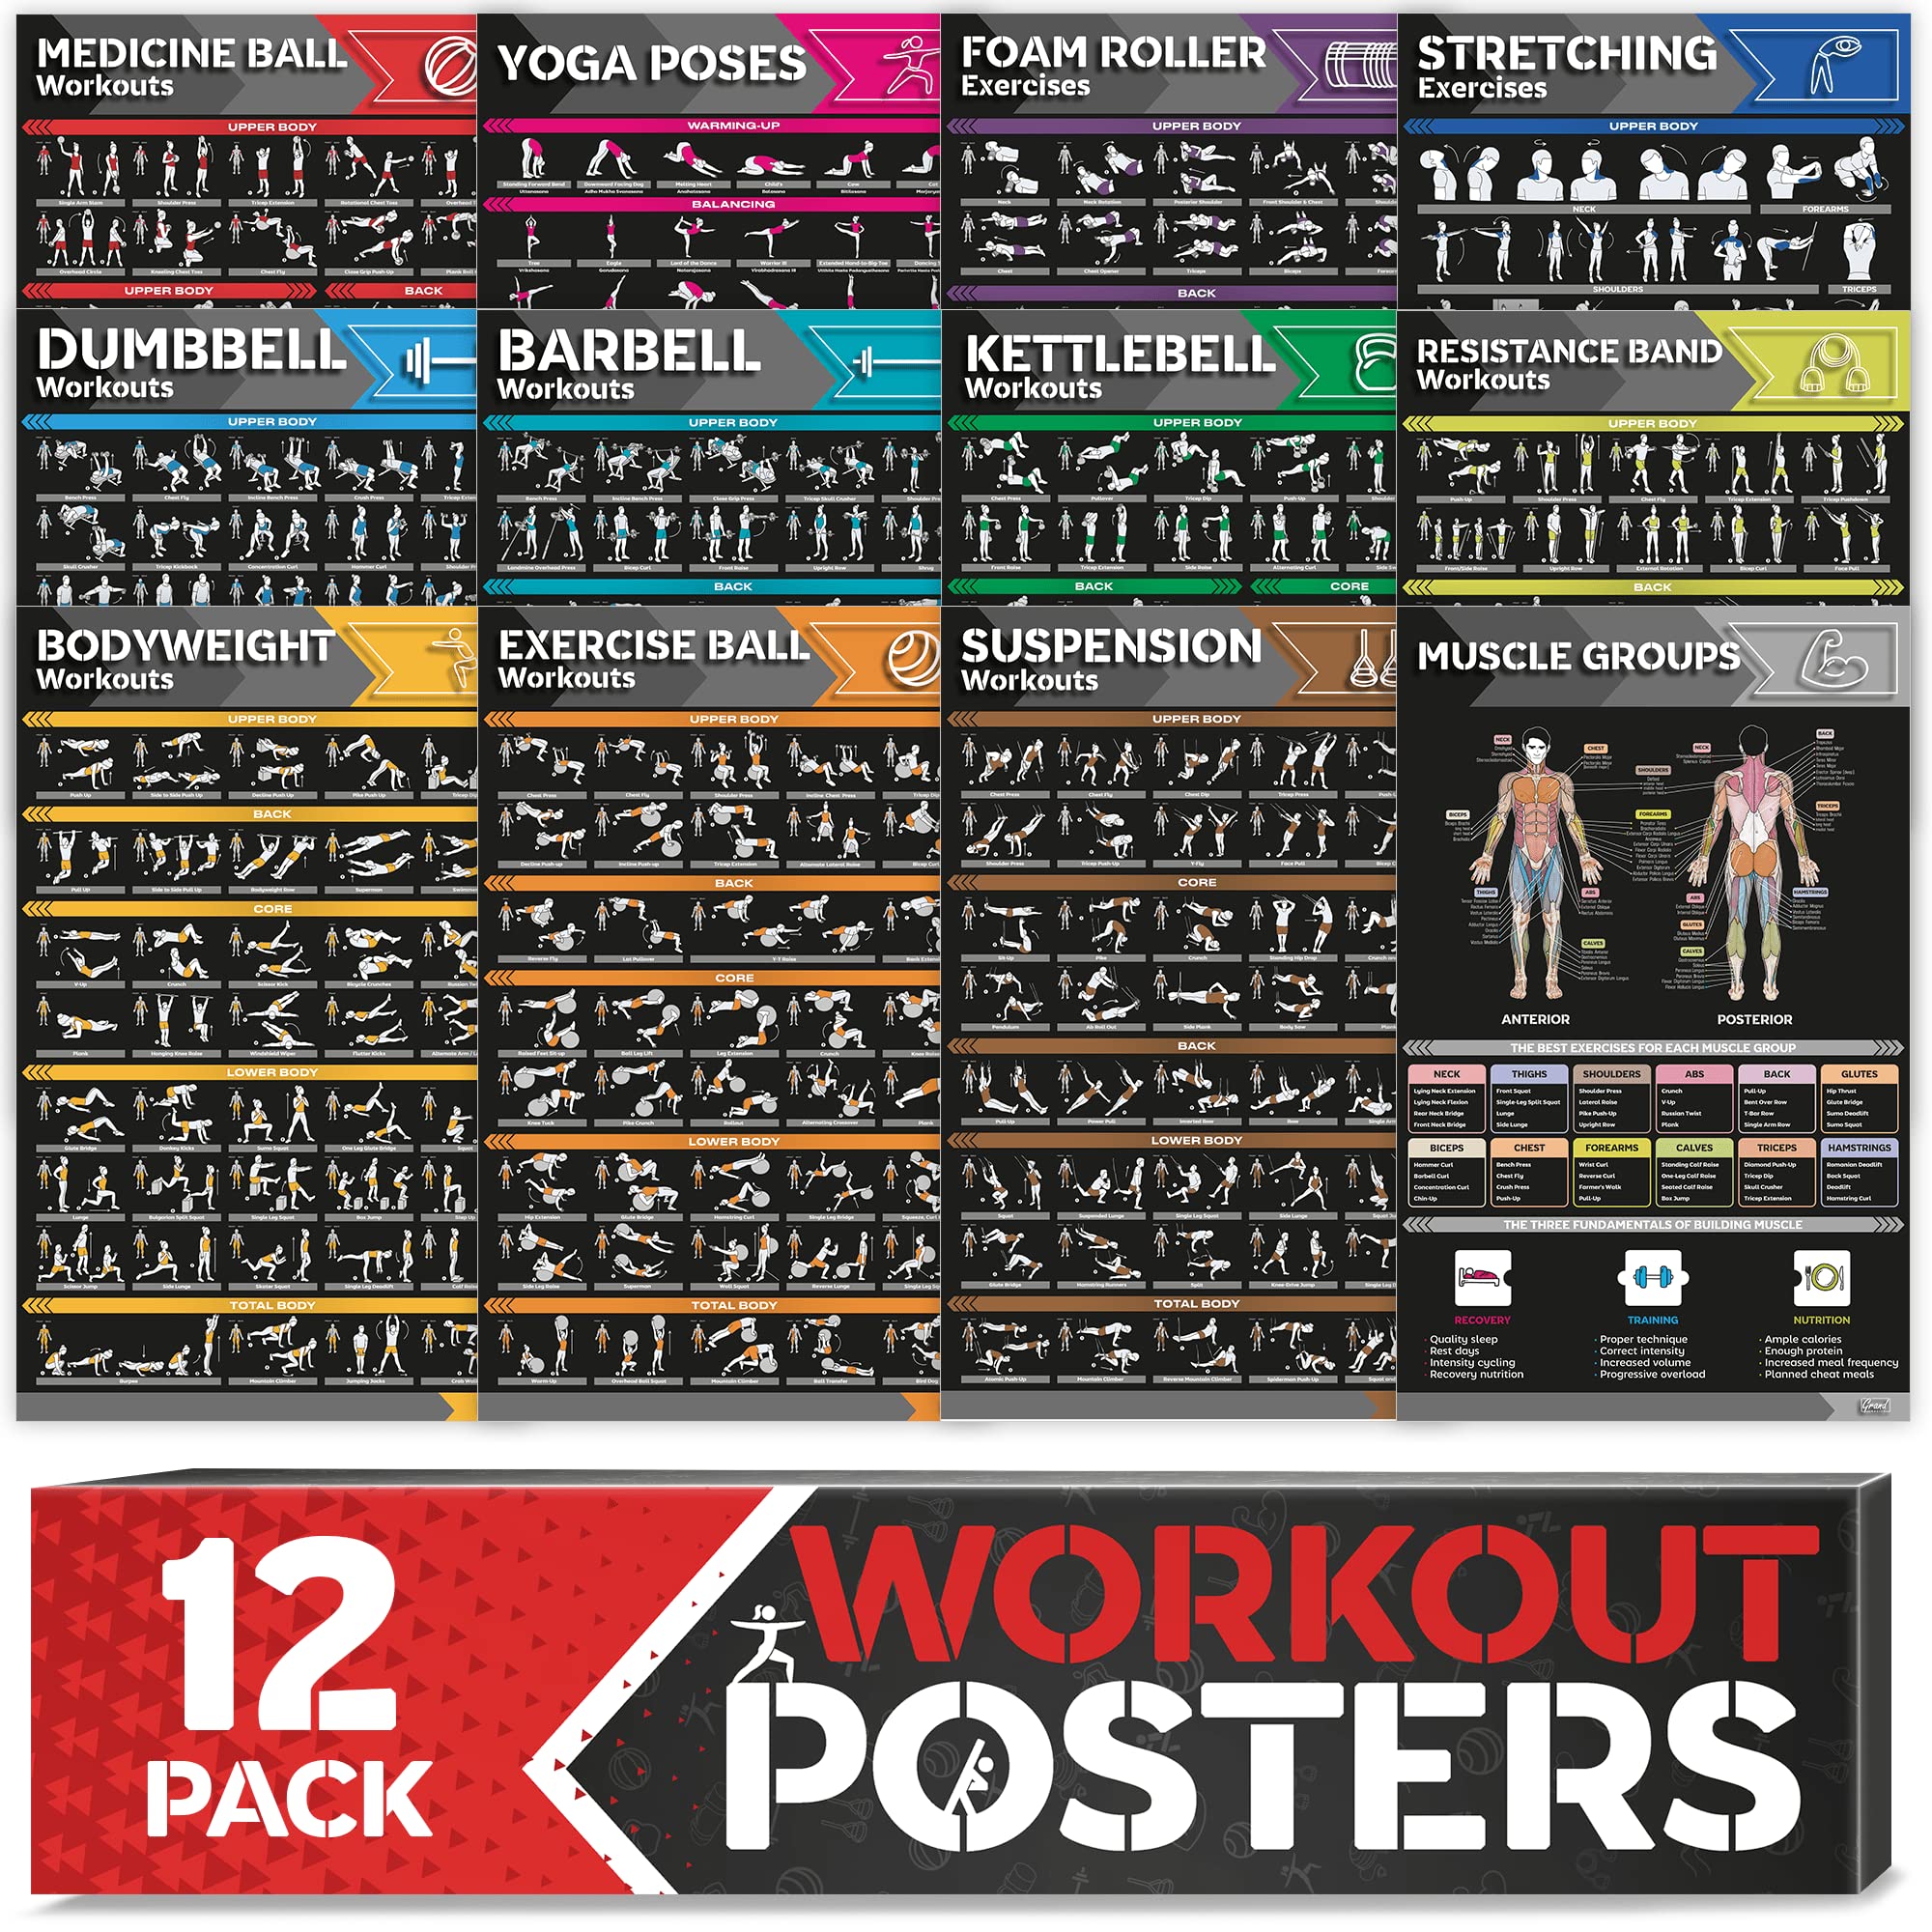 12-PACK Laminated Large Workout Poster Set - Perfect Workout